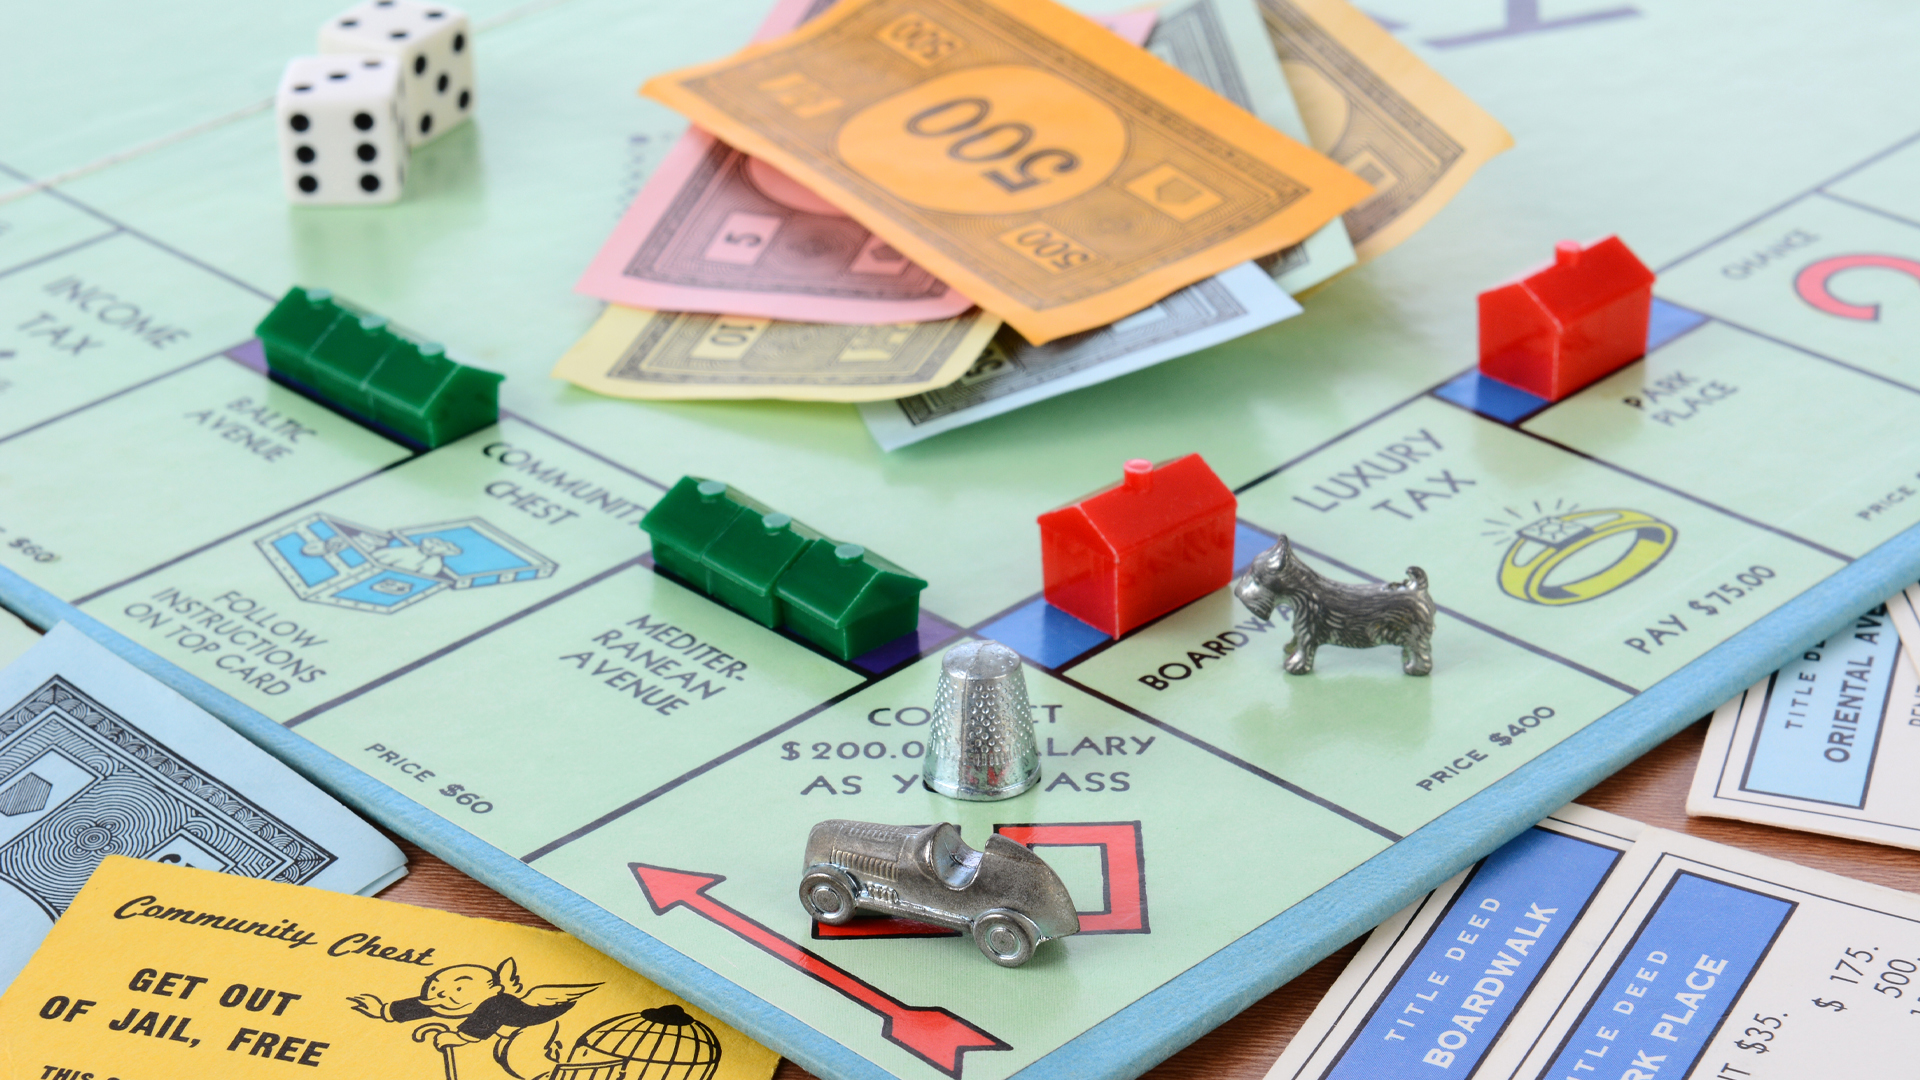 monopoly games online